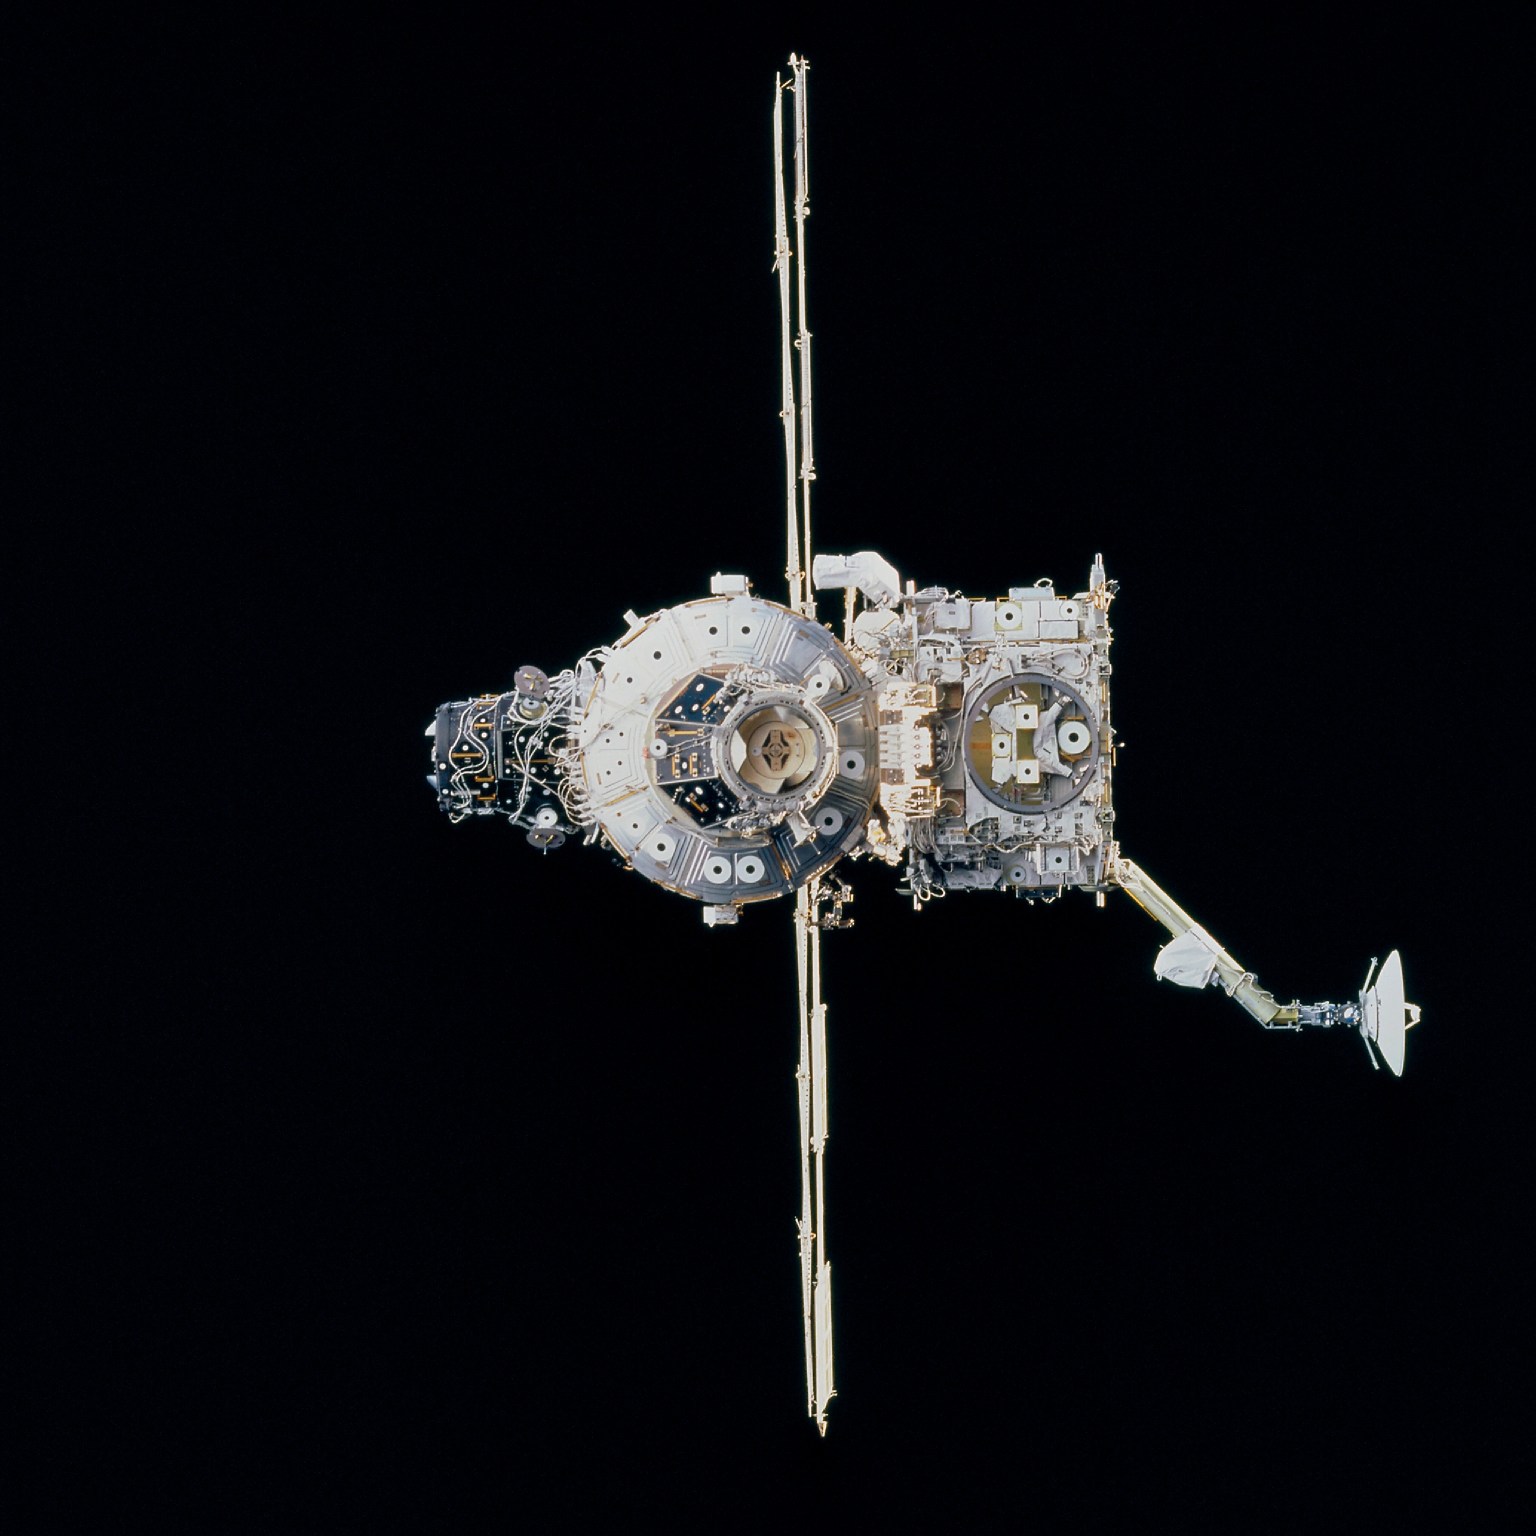 The International Space Station's Z1 (Zenith) truss structure and its antenna, as well as its new pressurized mating adapter, are pictured from space shuttle Discovery after it undocked from th eorbital outpost in October 20, 2000.